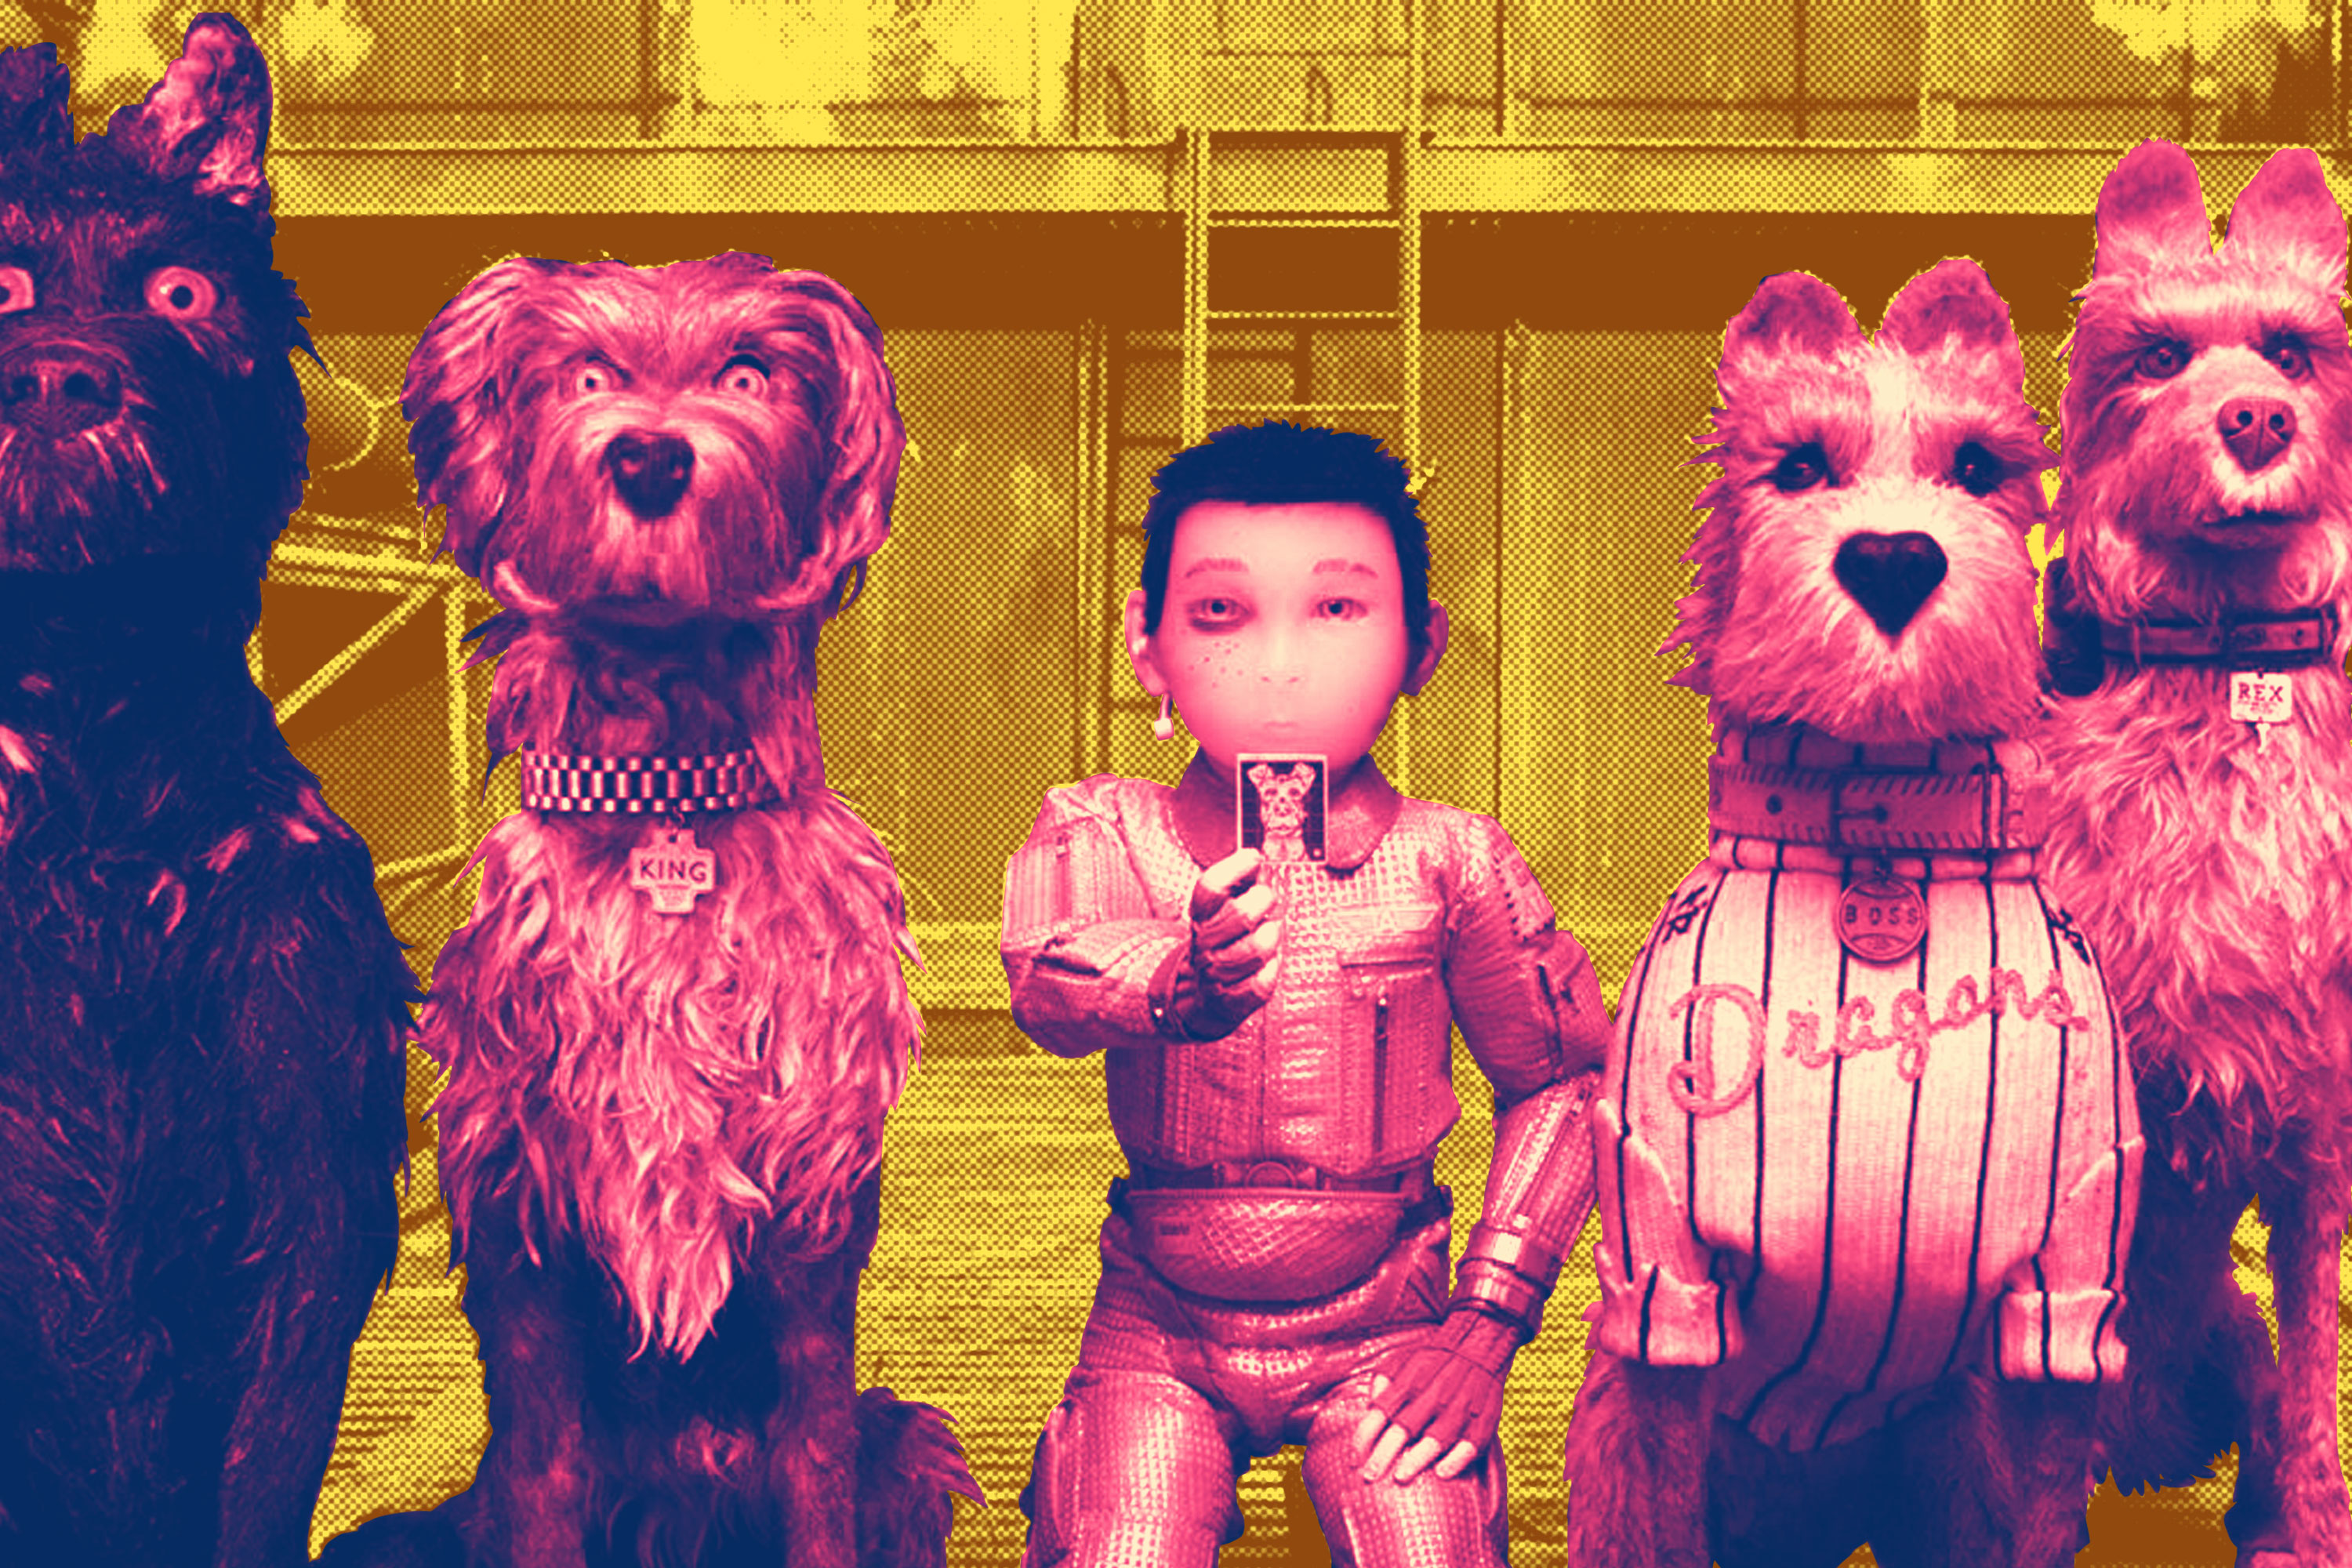 A treated image from ‘Isle of Dogs’